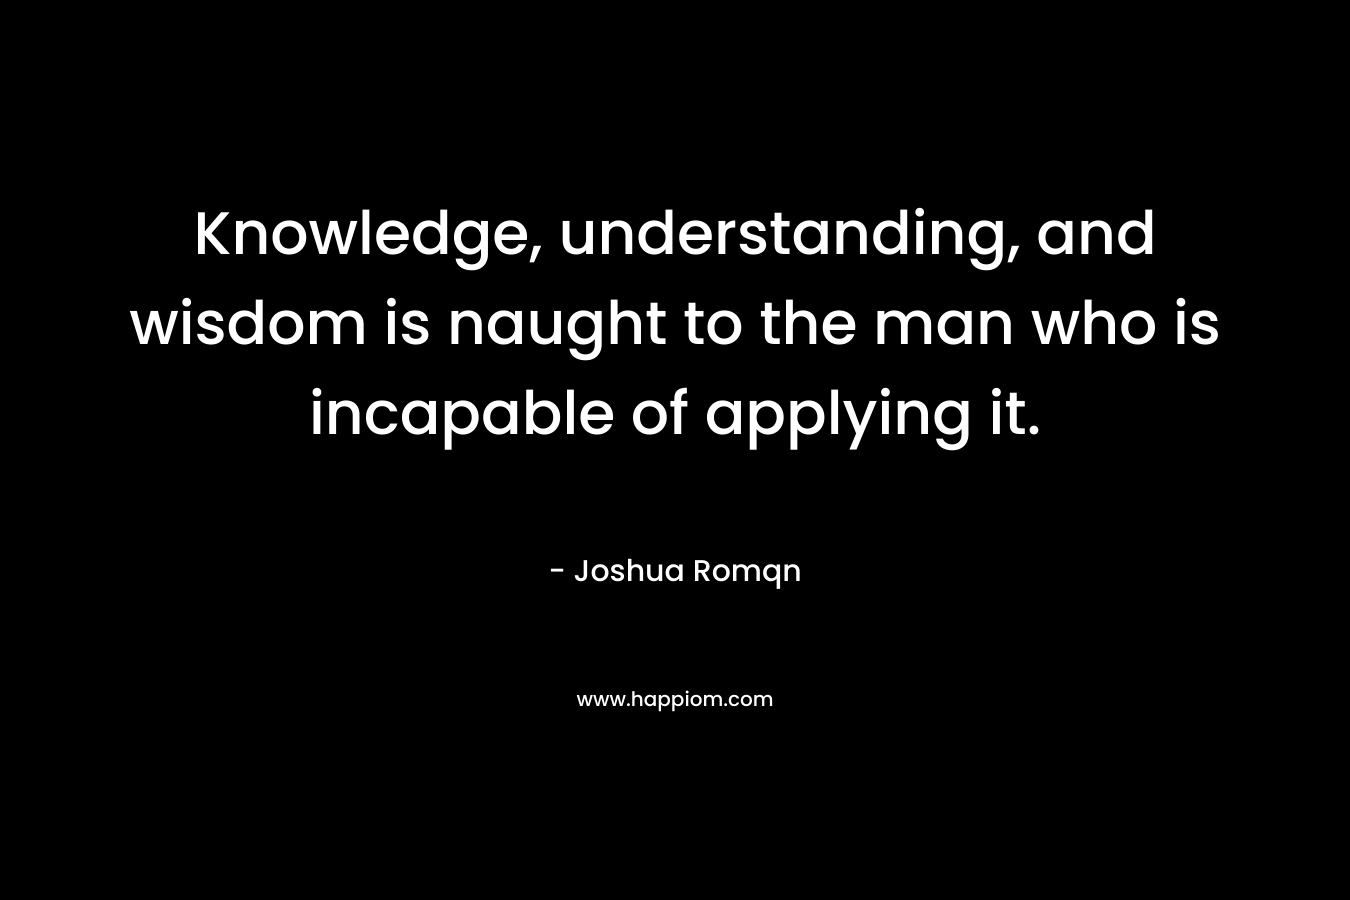 Knowledge, understanding, and wisdom is naught to the man who is incapable of applying it.